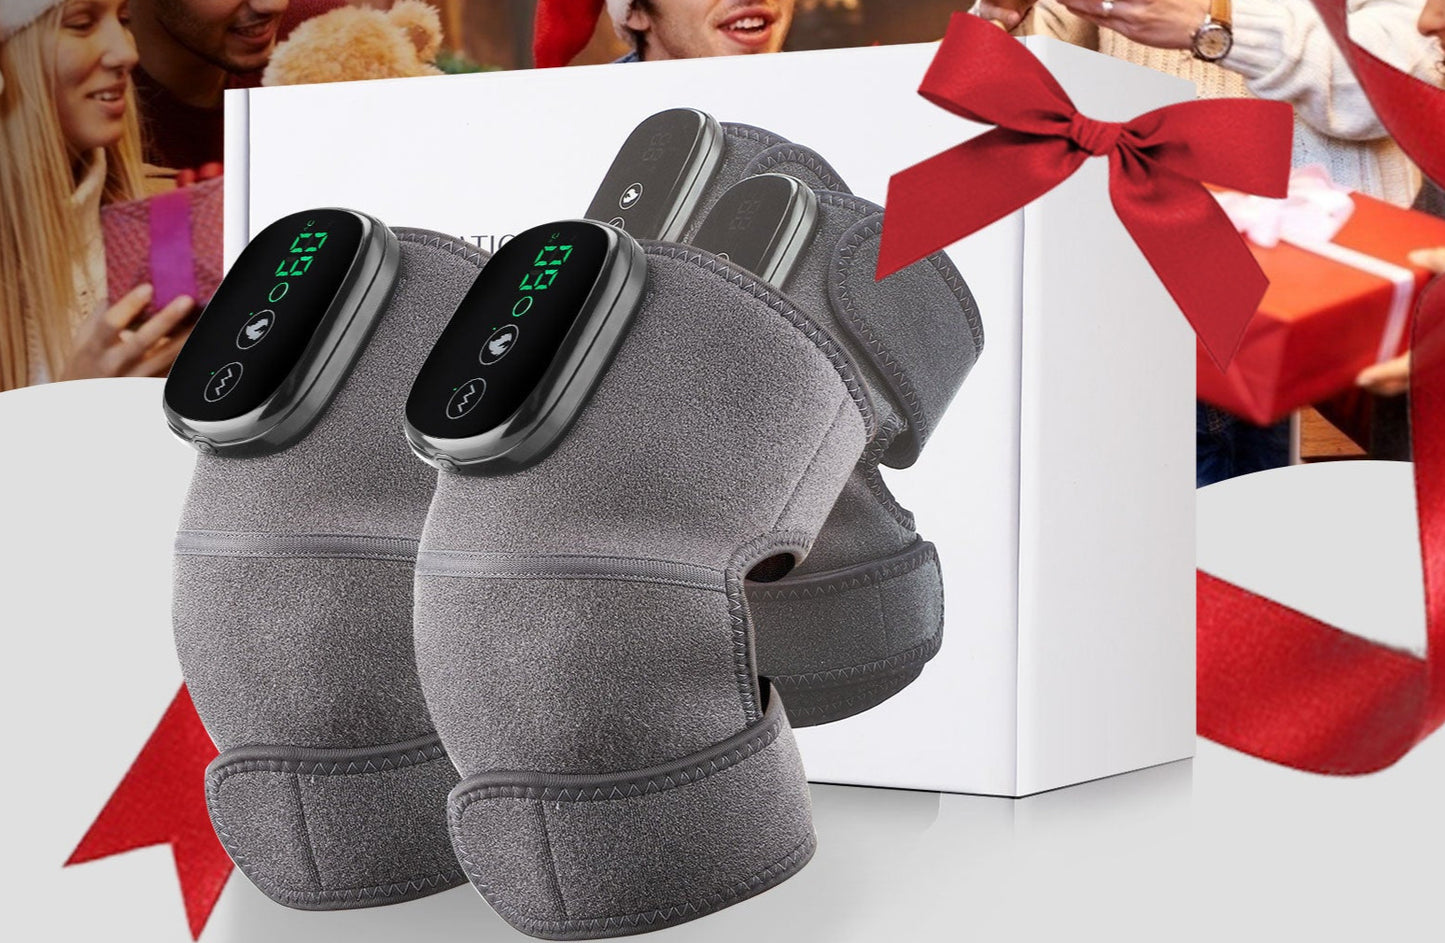 Electric Heating Knee Massager